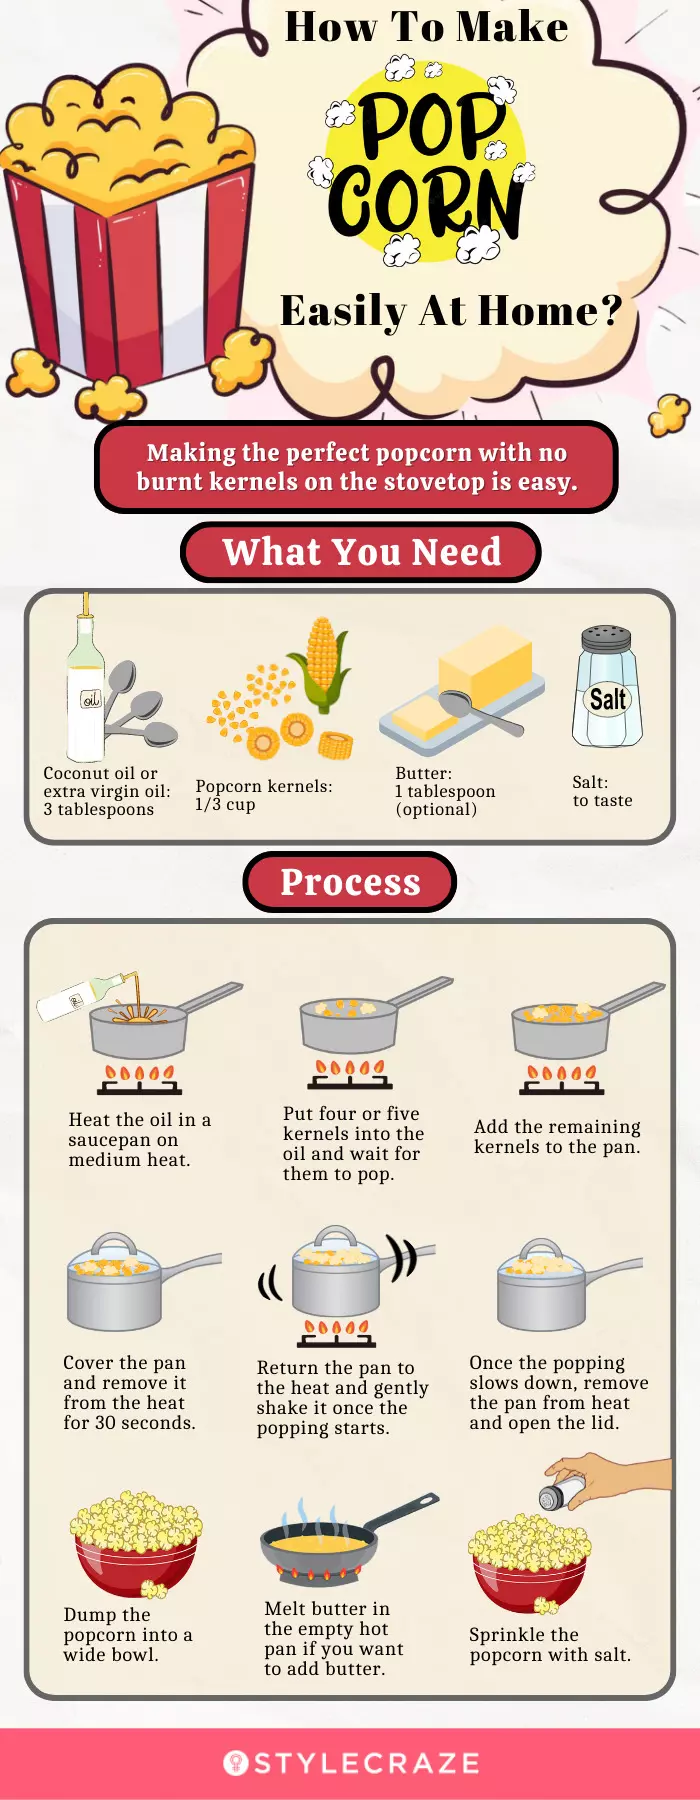 how to make pop corn easily at home (infographic)